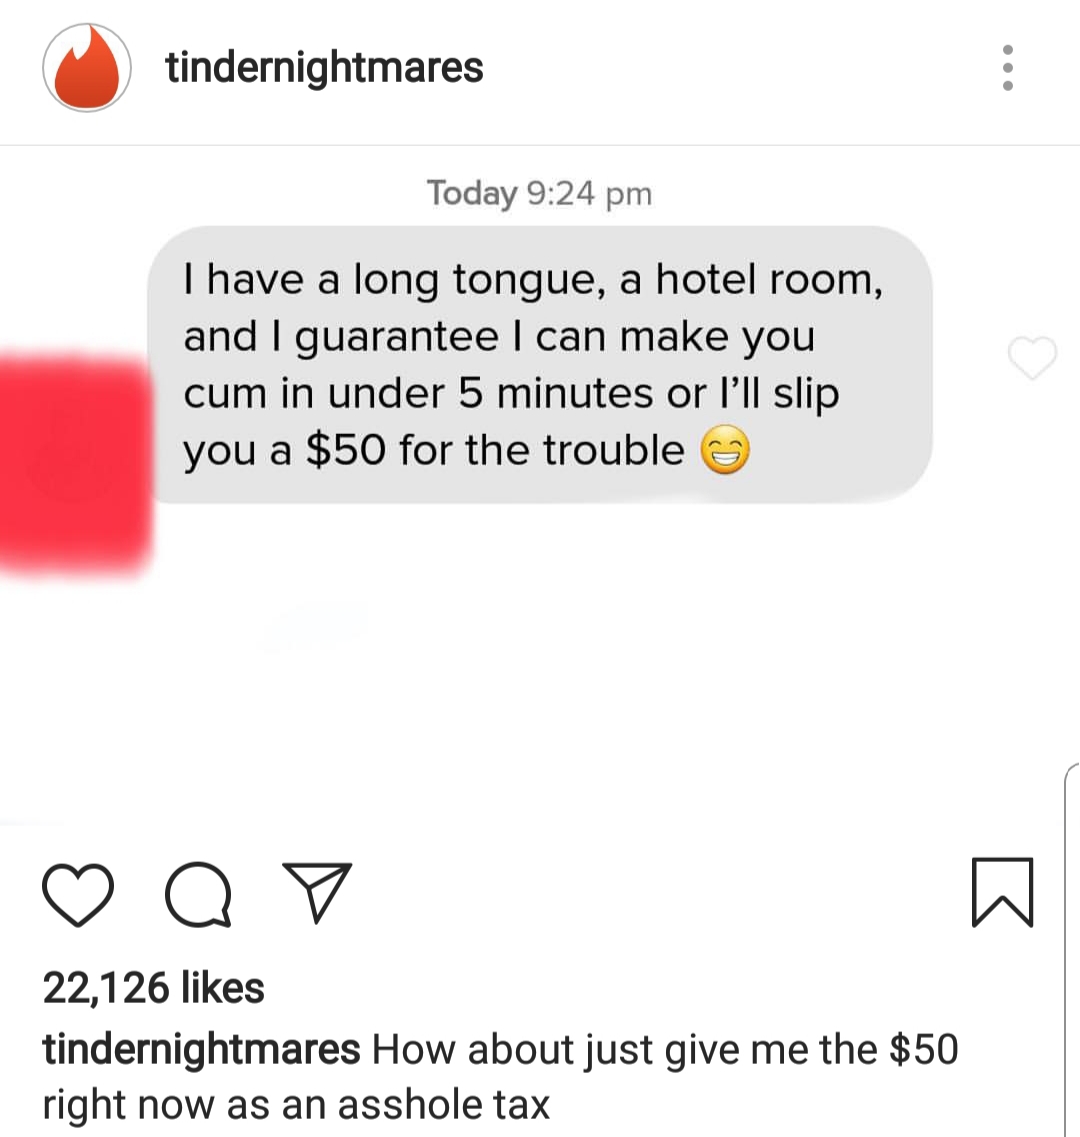 memes - document - tindernightmares Today I have a long tongue, a hotel room, and I guarantee I can make you cum in under 5 minutes or I'll slip you a $50 for the trouble Q 22,126 tindernightmares How about just give me the $50 right now as an asshole tax